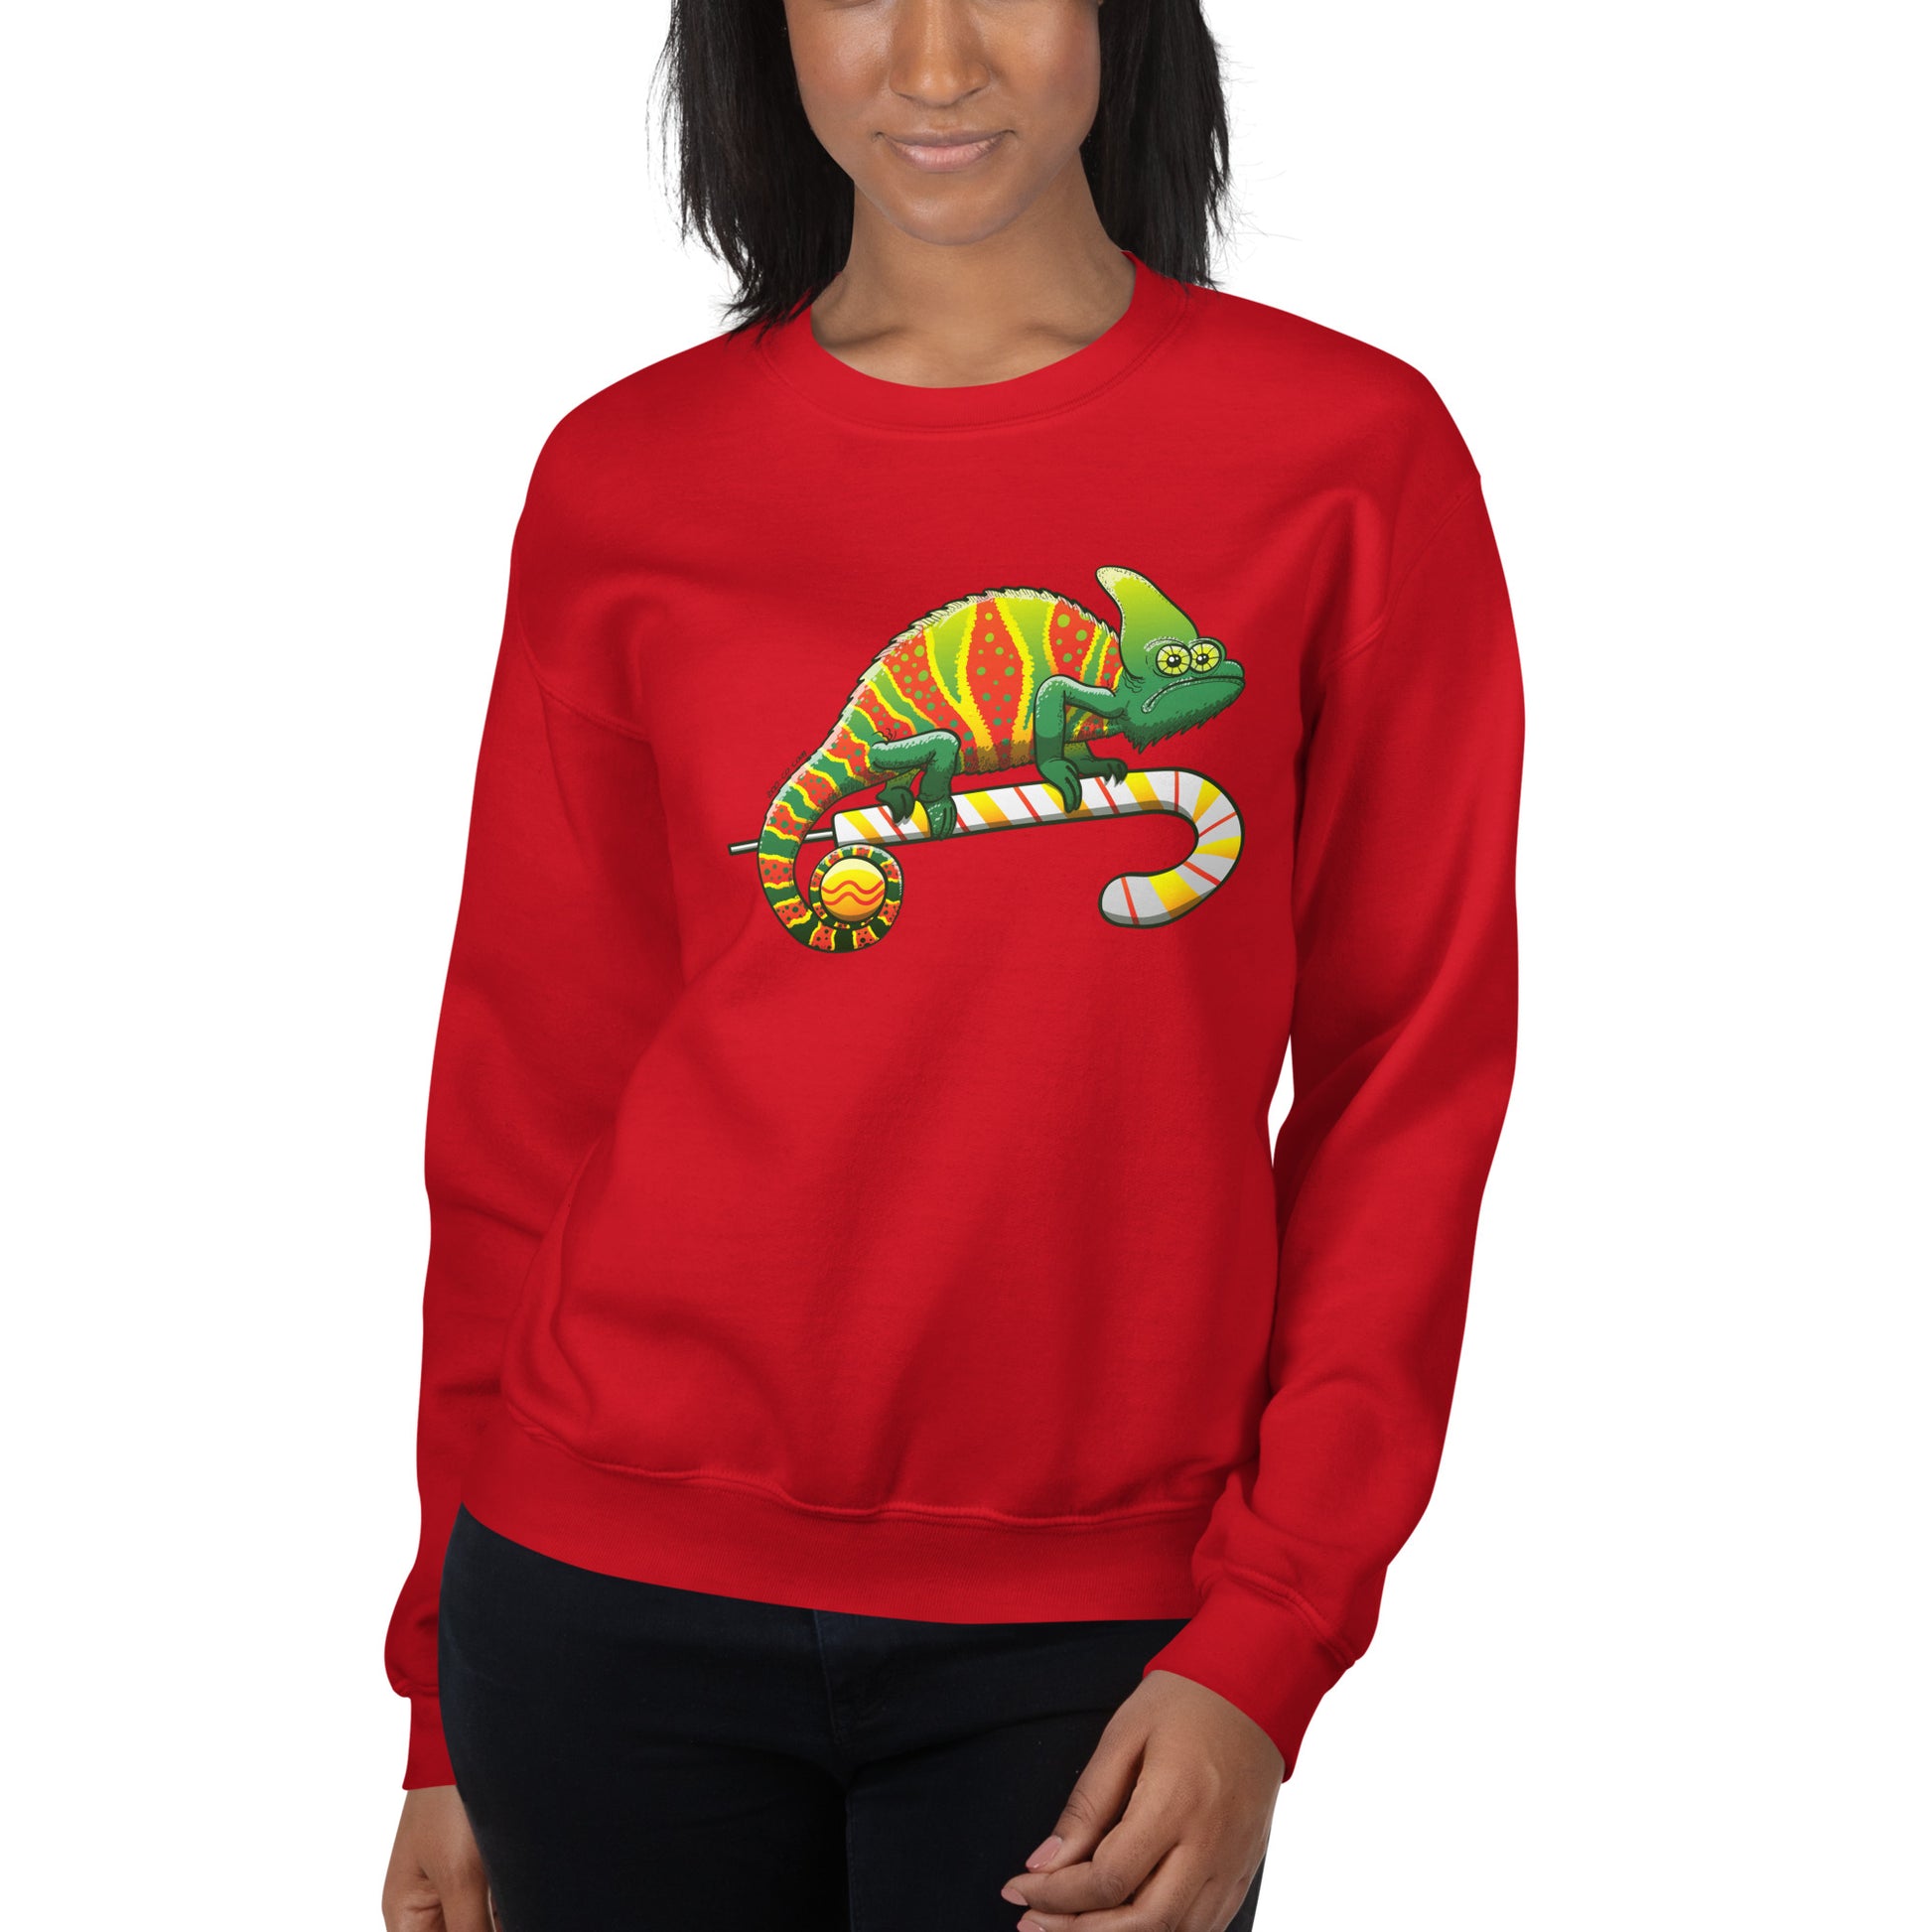 Christmas chameleon ready for the big season - Unisex Sweatshirt. Red. Overview